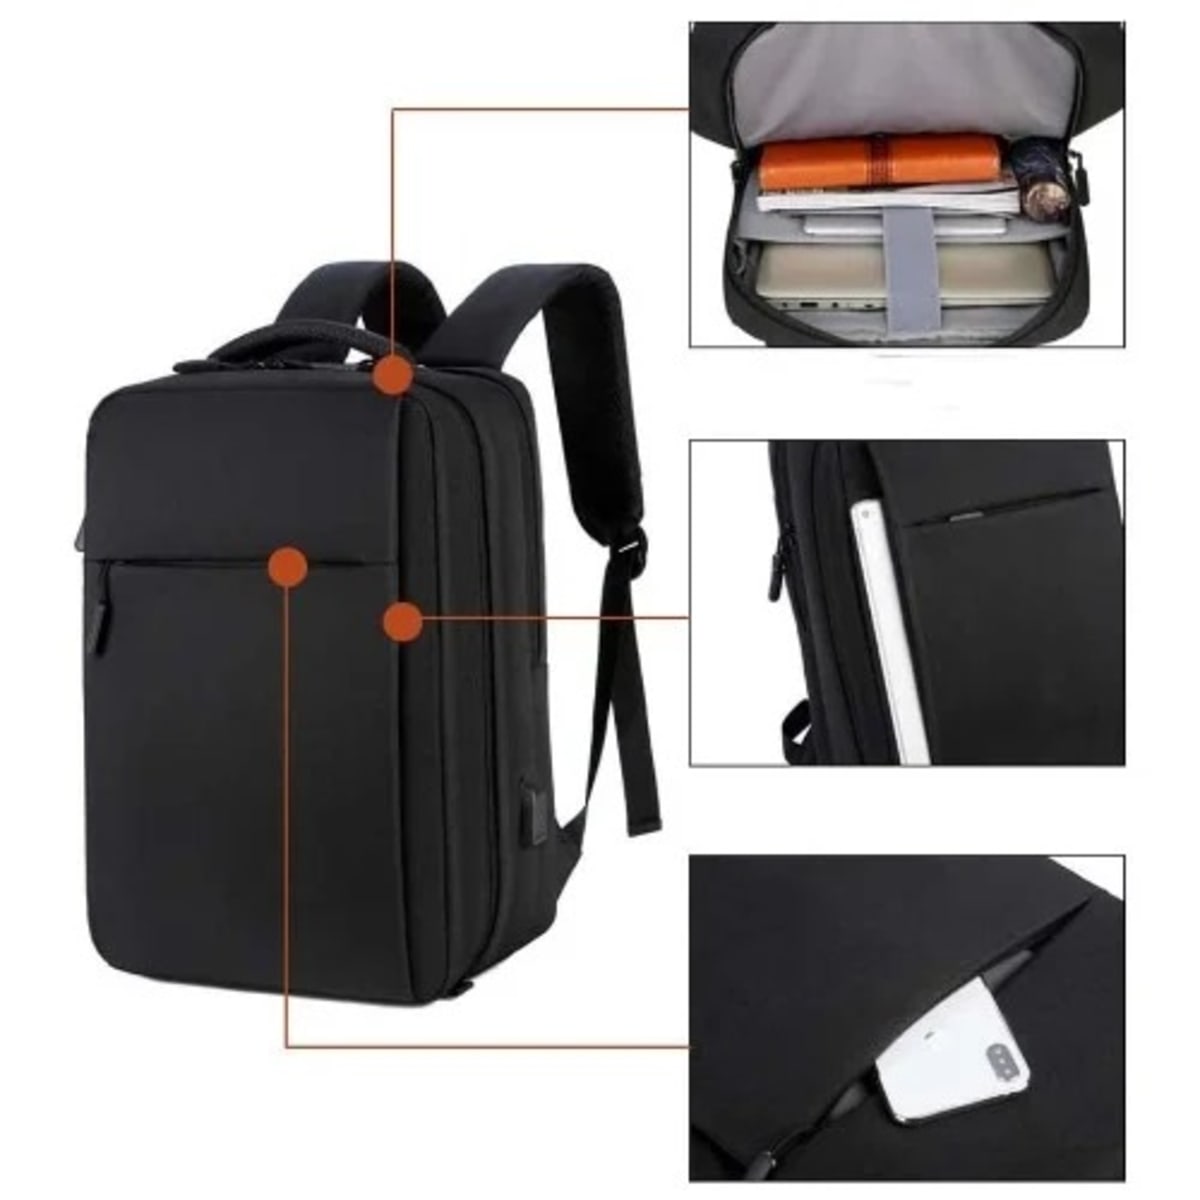 HP INVENT Laptop Bag, Men's Fashion, Bags, Briefcases on Carousell